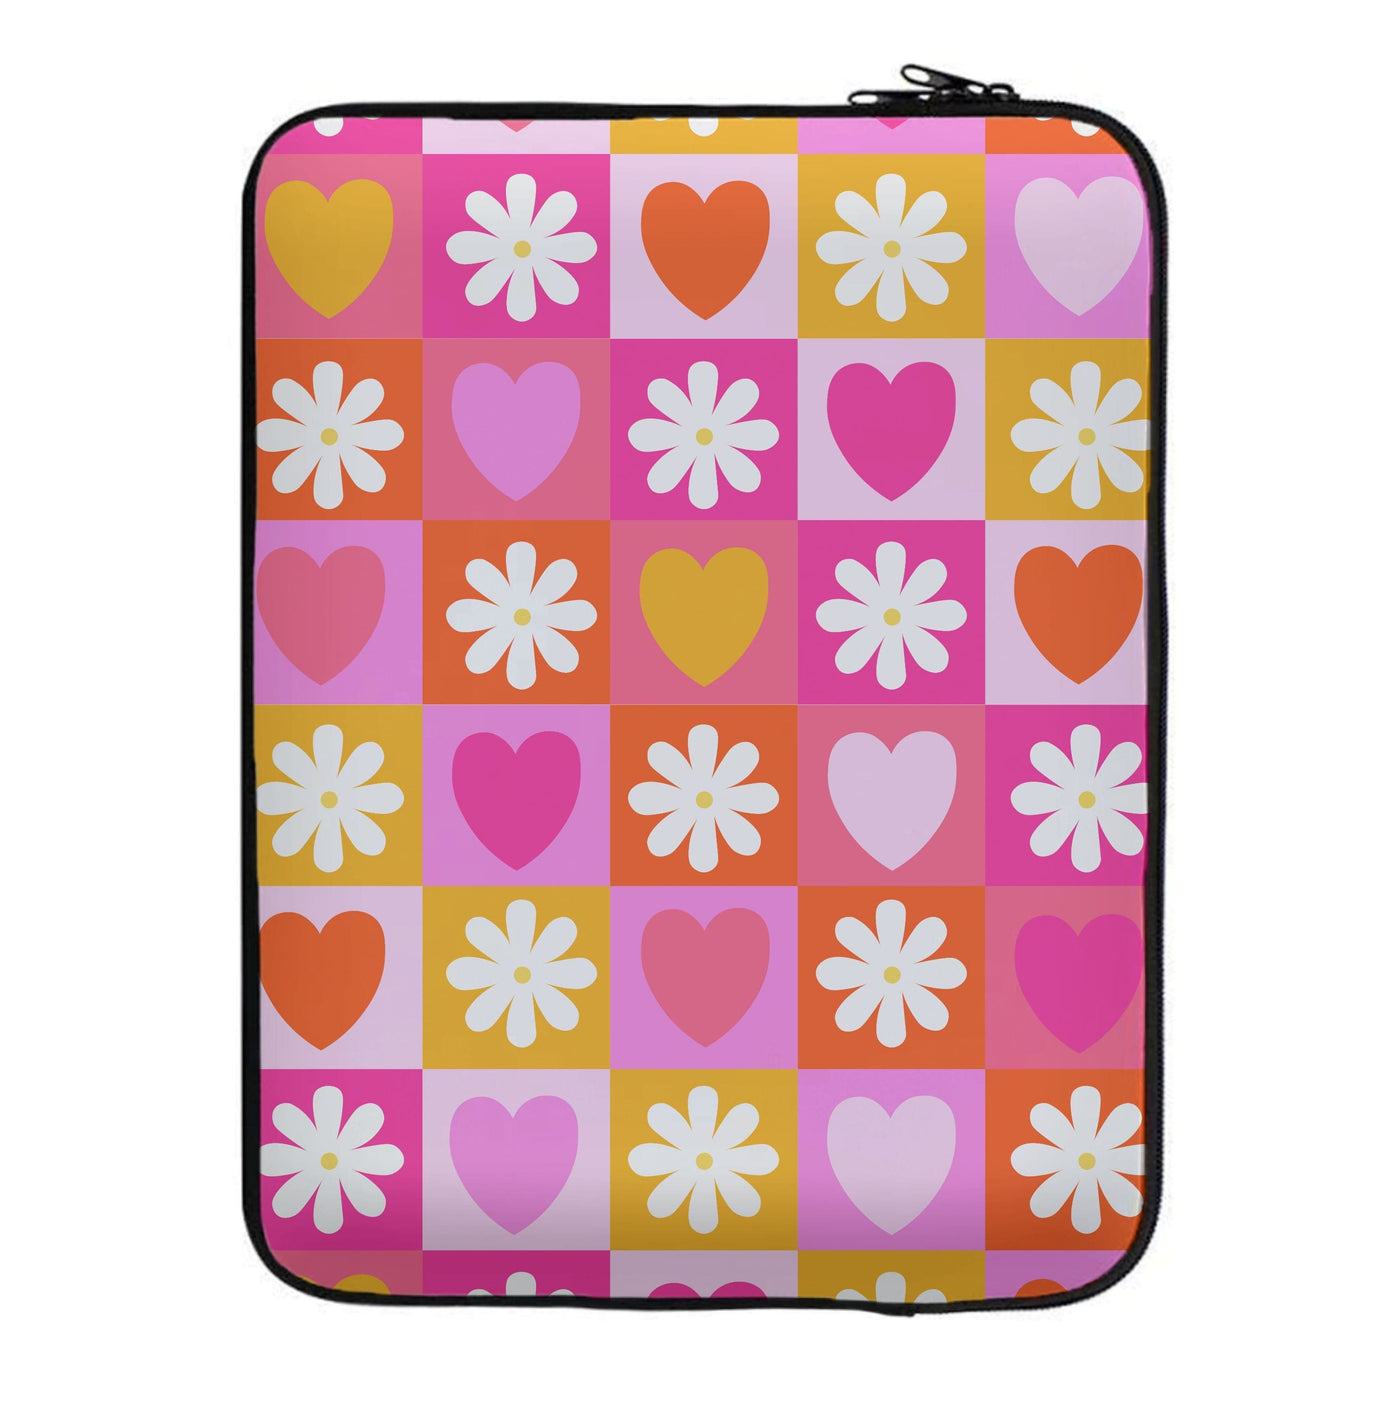 Checked Hearts And Flowers - Spring Patterns Laptop Sleeve